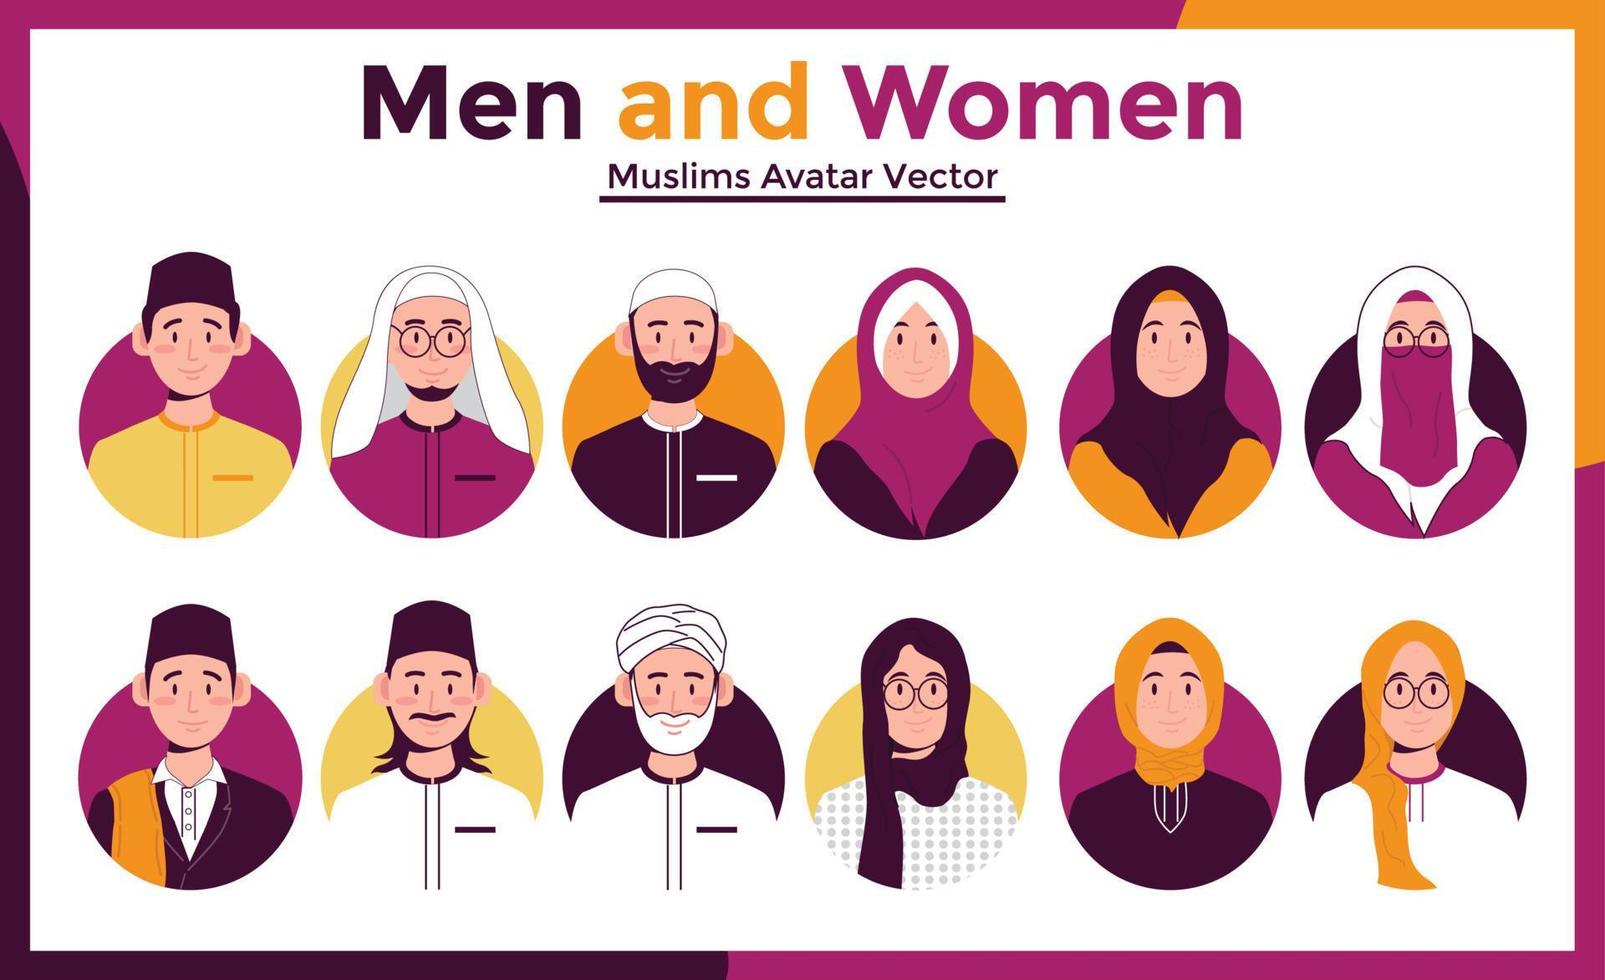 Add diversity and representation to your projects with our vector set of Muslim avatars, featuring various ages, genders, and styles.